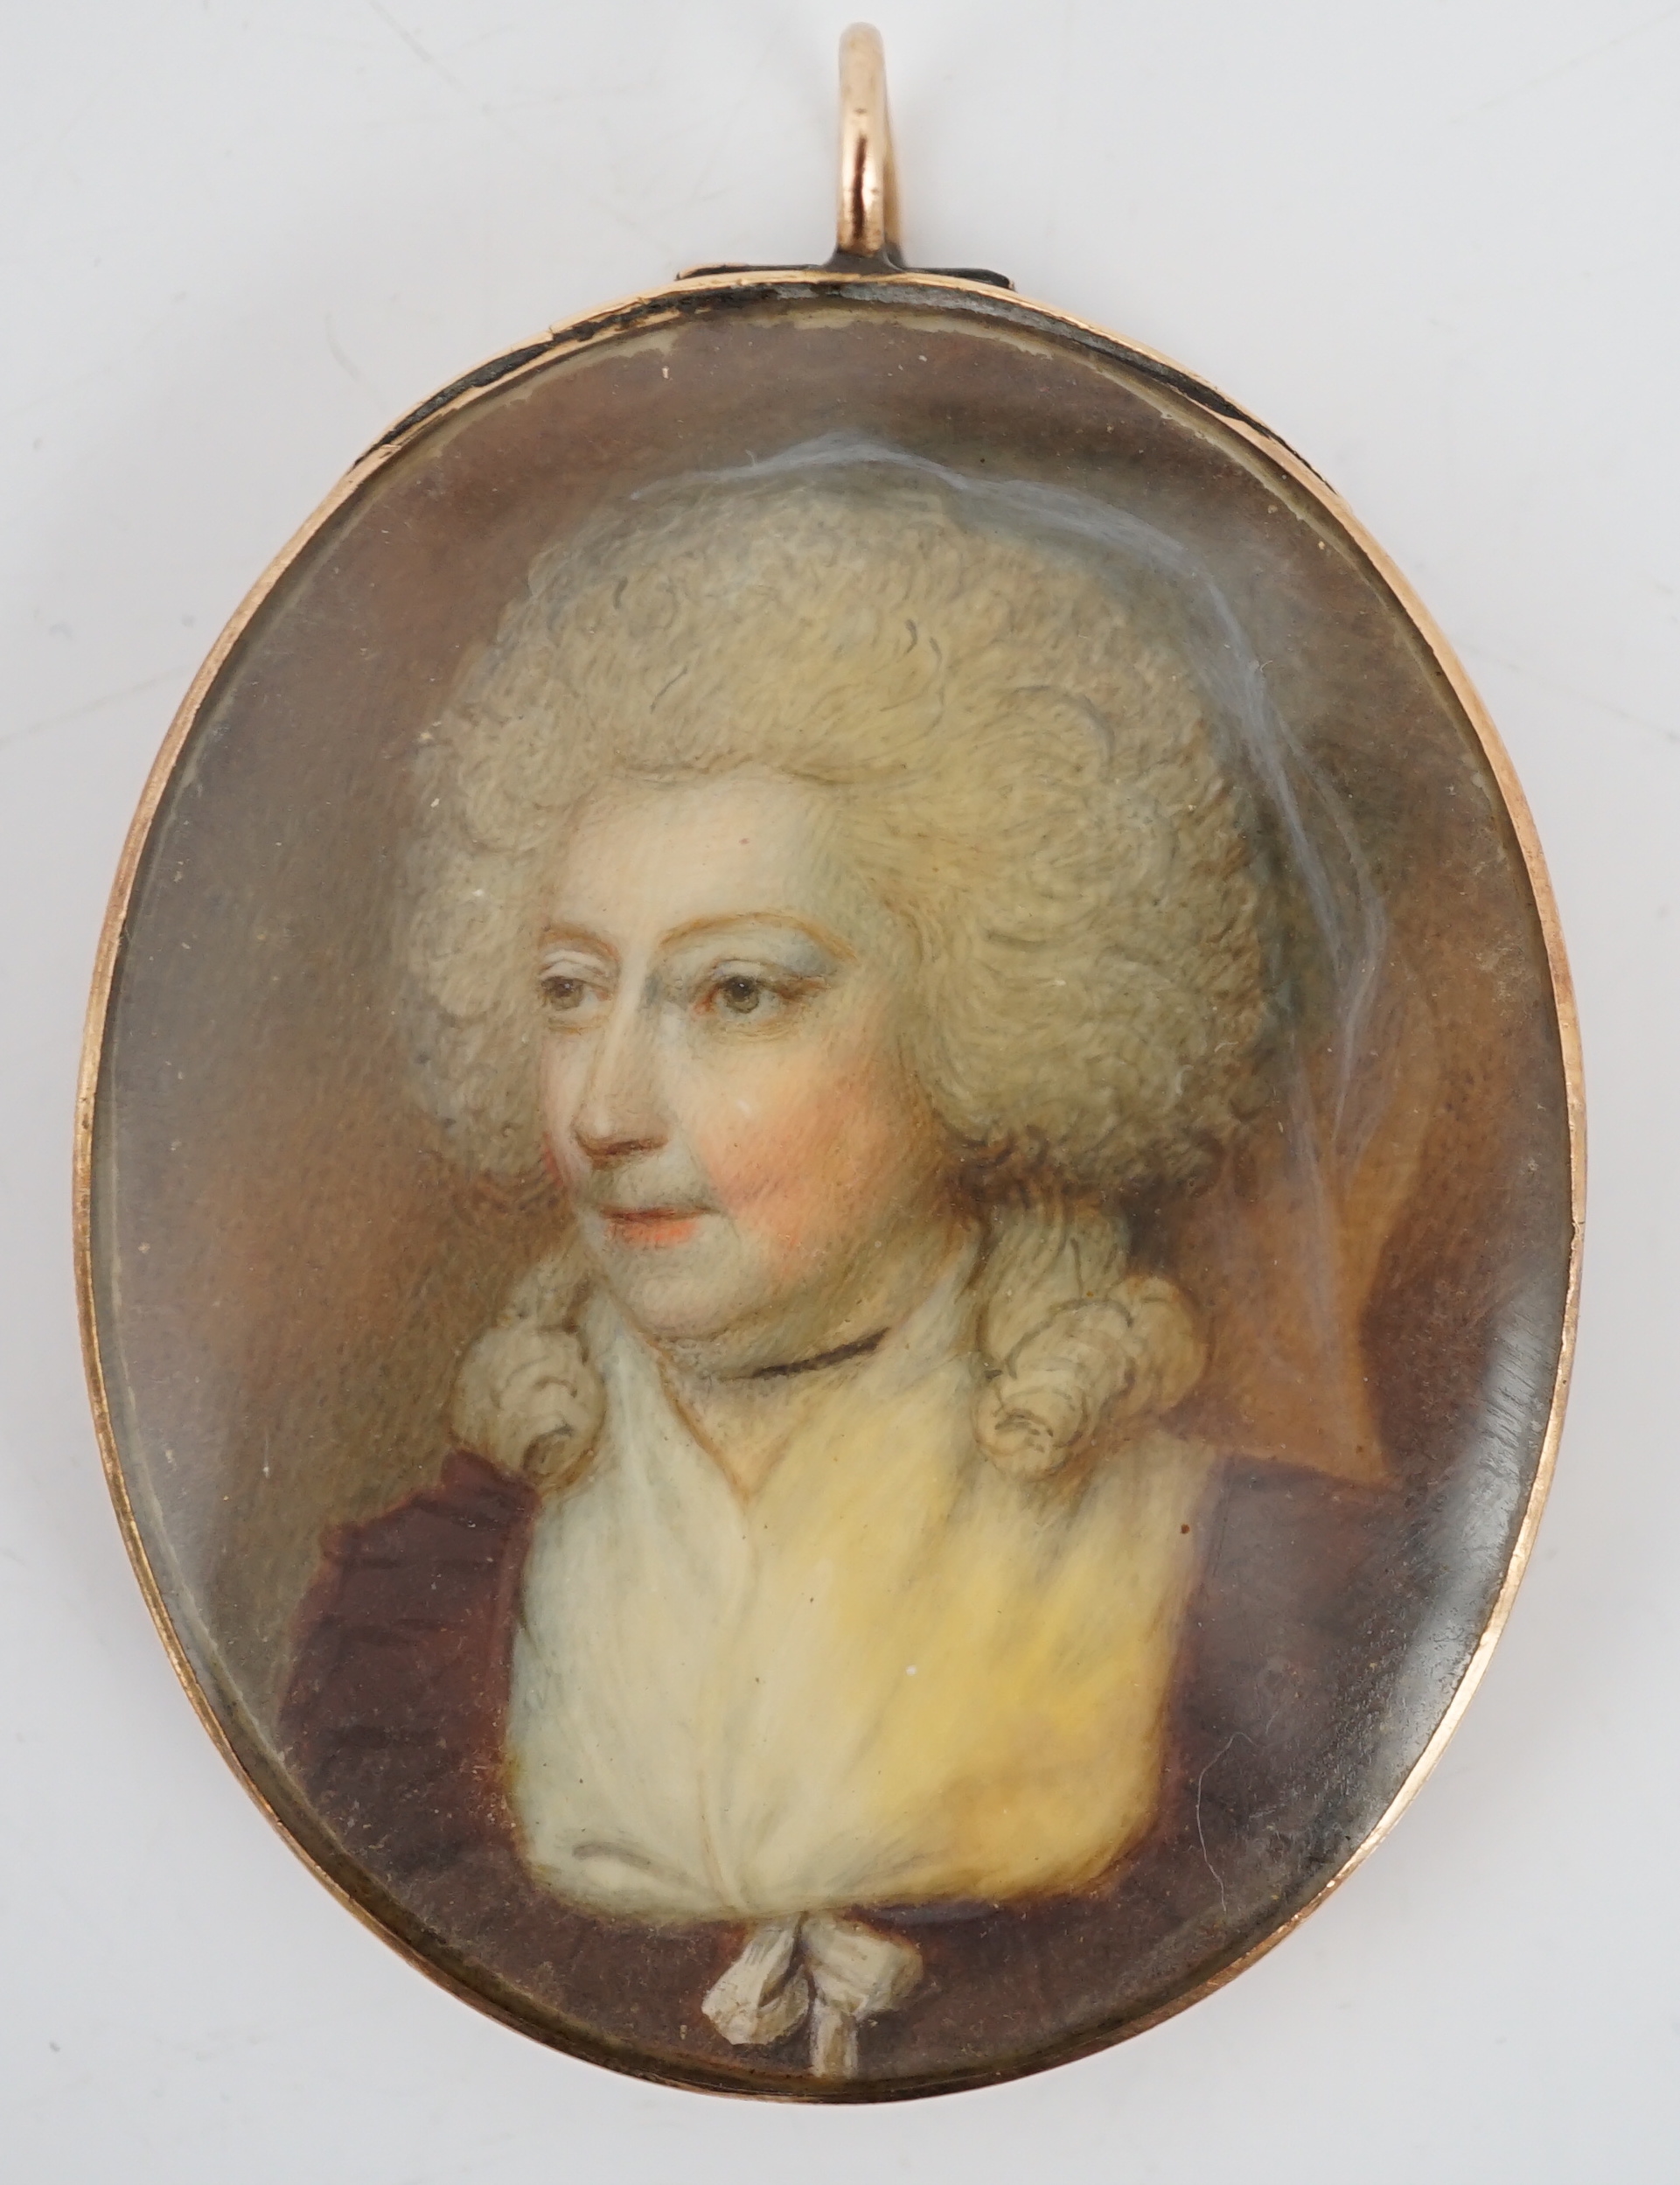 Attributed to John Bogle (British, 1746-1803), Portrait miniature of a lady, oil on ivory, 4.5 x 3.7cm. CITES Submission reference HW3B76TH